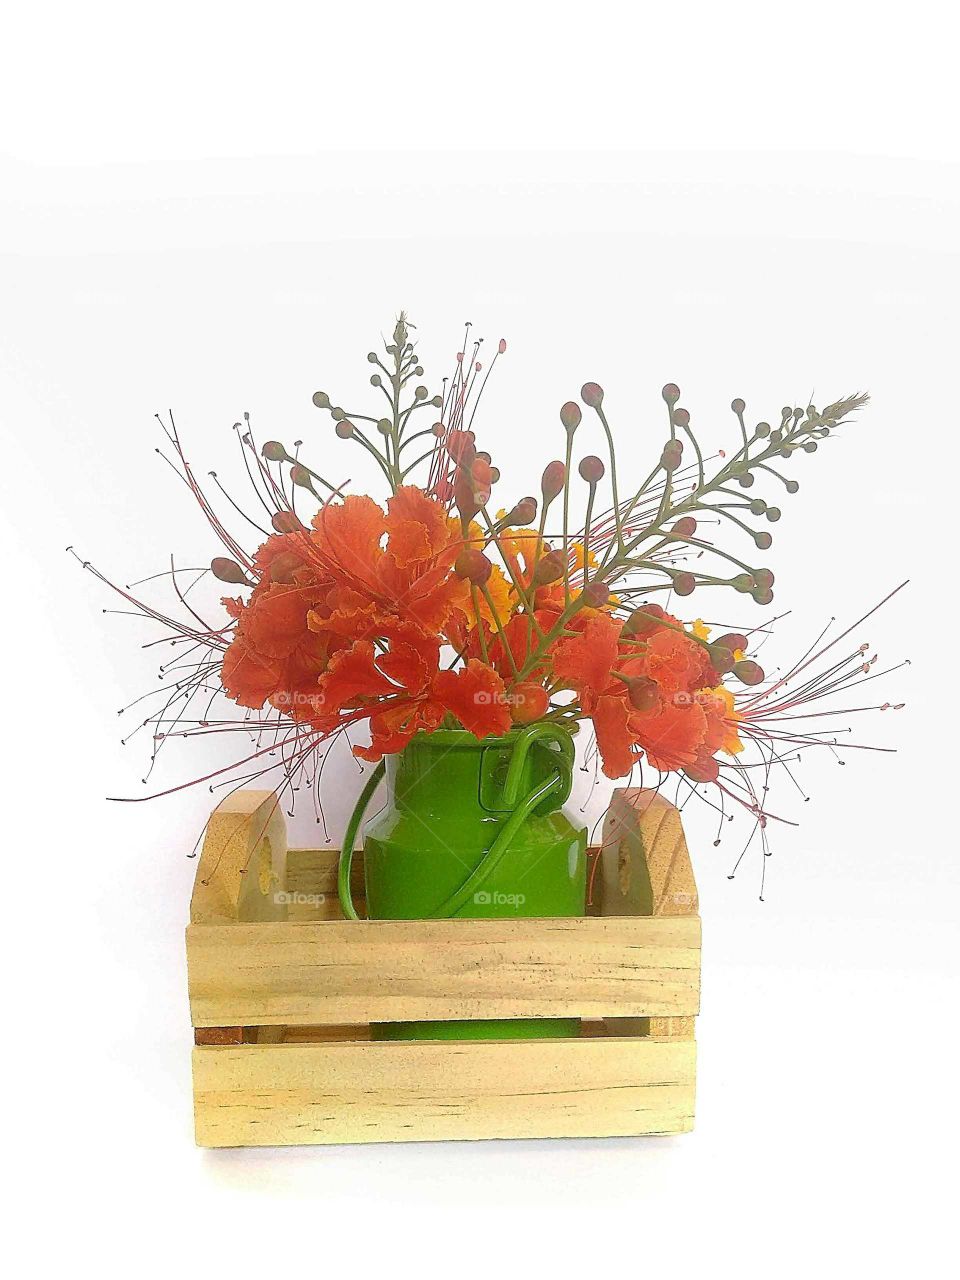 Ornamental composition of Poinciana flower in vase inside mini wooden crate.